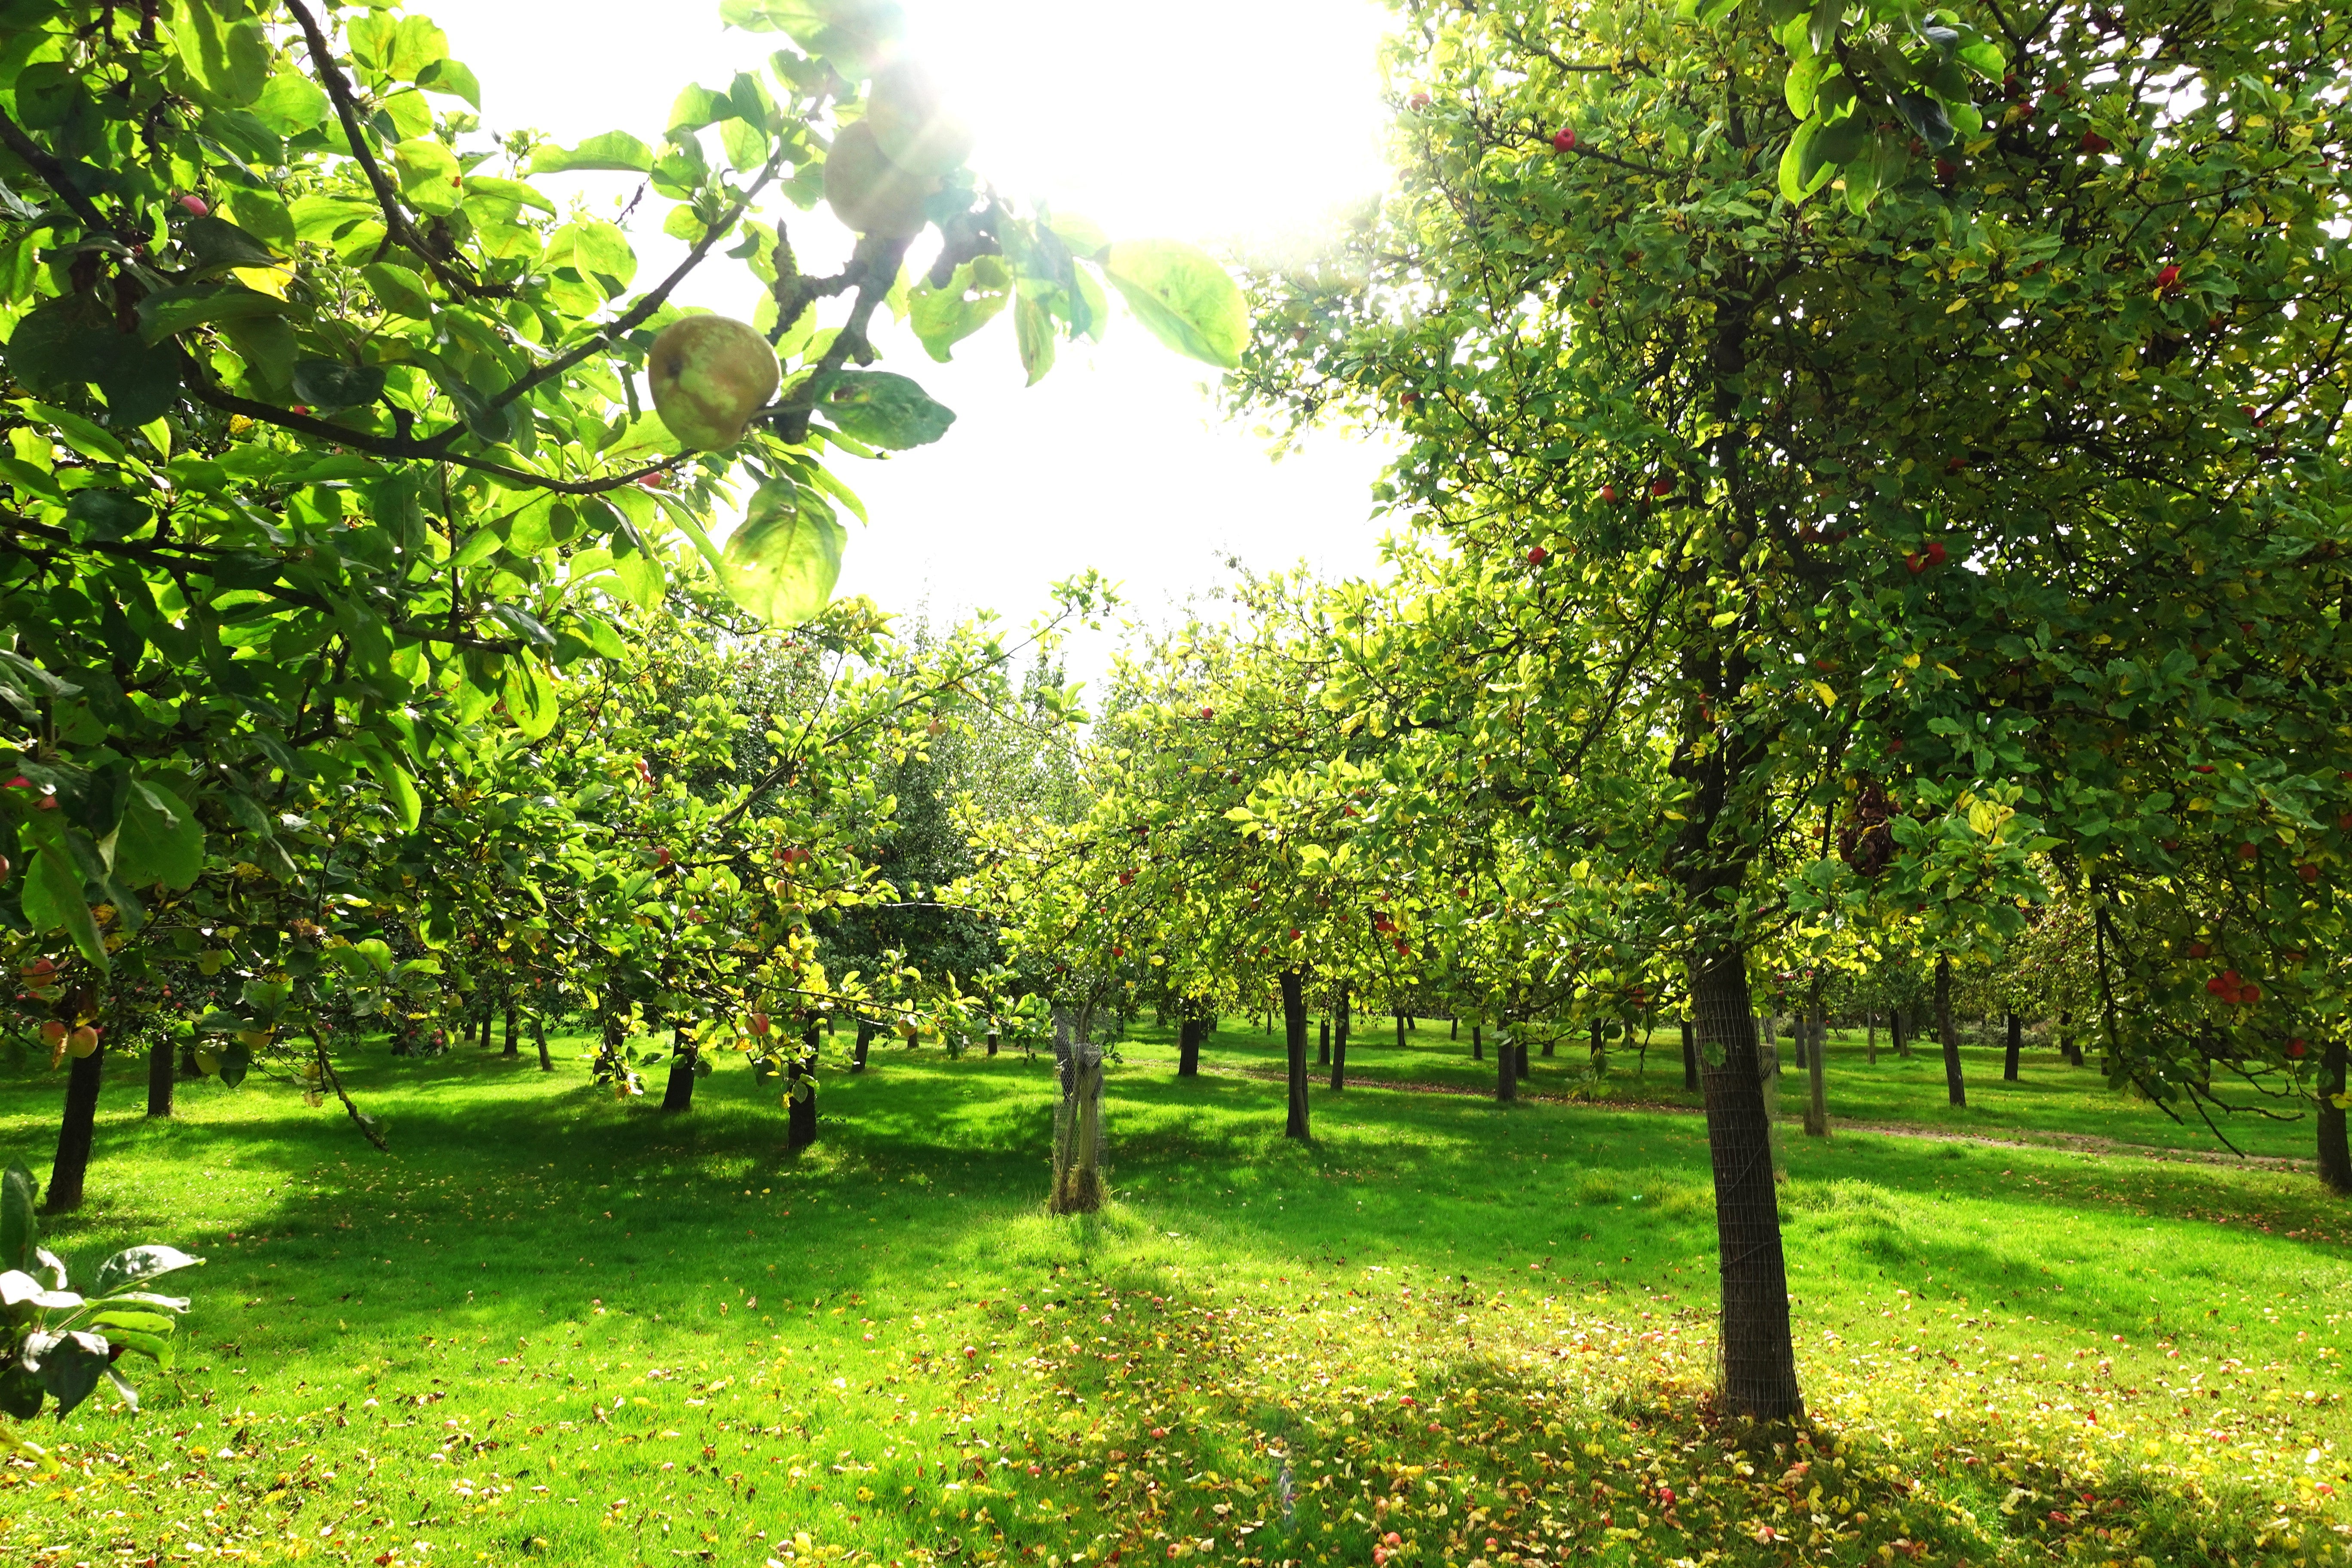 Somerset’s lush apple orchards